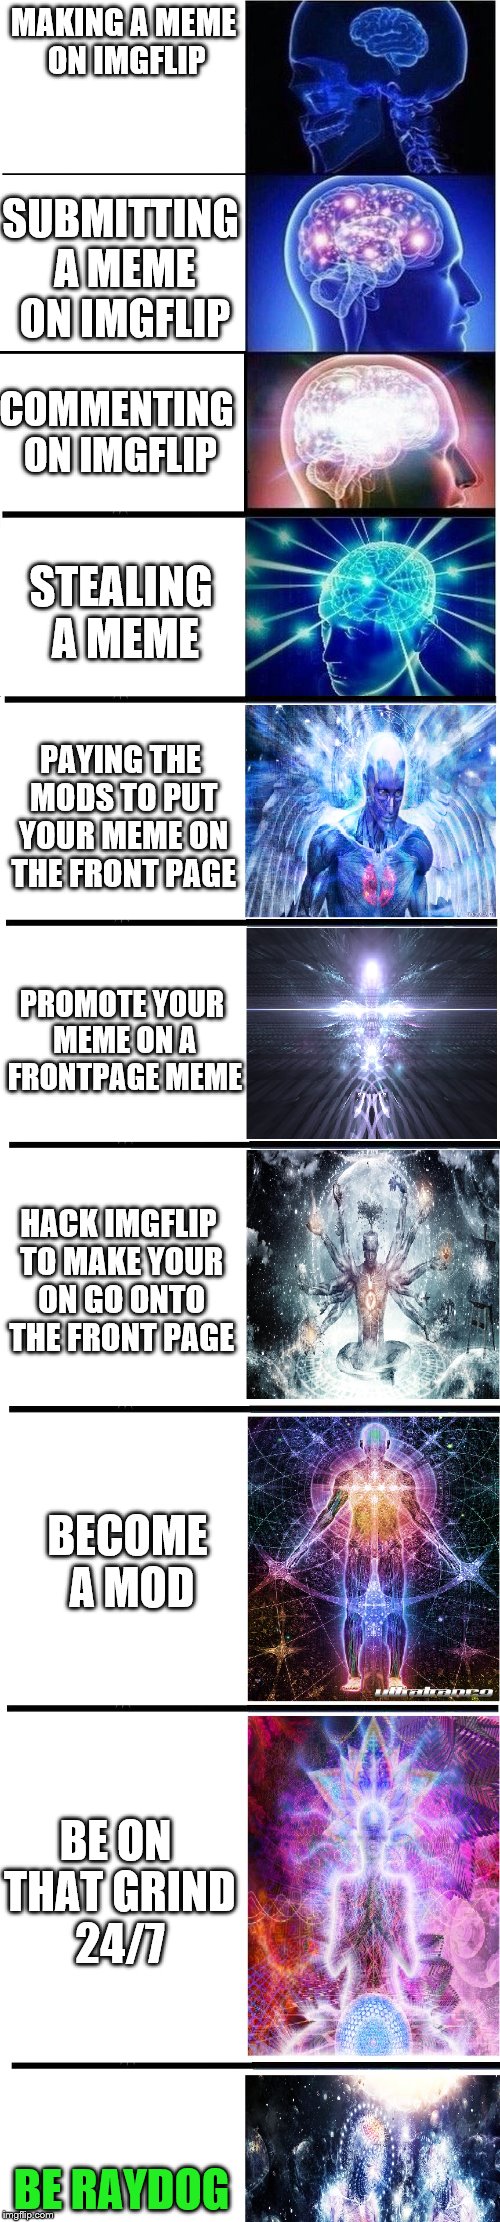 How to gain points on Imgflip. | MAKING A MEME ON IMGFLIP; SUBMITTING A MEME ON IMGFLIP; COMMENTING ON IMGFLIP; STEALING A MEME; PAYING THE MODS TO PUT YOUR MEME ON THE FRONT PAGE; PROMOTE YOUR MEME ON A FRONTPAGE MEME; HACK IMGFLIP TO MAKE YOUR ON GO ONTO THE FRONT PAGE; BECOME A MOD; BE ON THAT GRIND 24/7; BE RAYDOG | image tagged in expanding brain meme,memes,imgflip | made w/ Imgflip meme maker